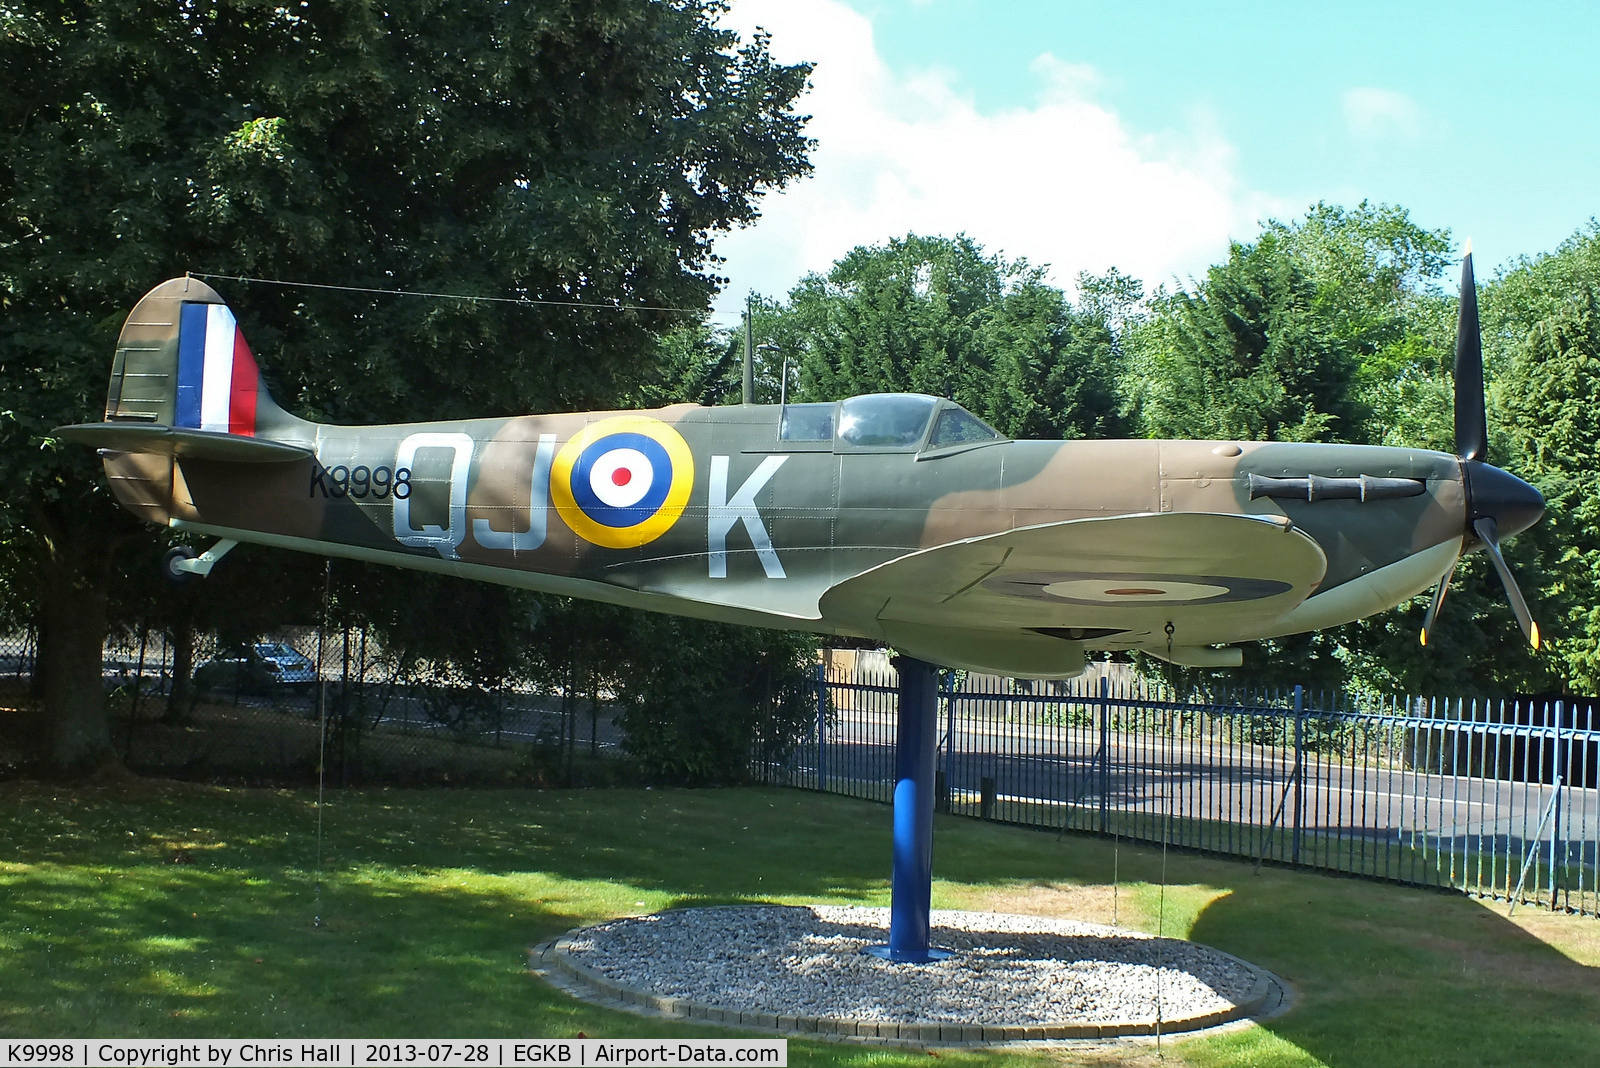 K9998, 2010 Supermarine Spitfire Mk IA Replica C/N Not found K9998, Painted to represent 92 Sqn Spitfire flown by Plt. Off. G.A. Wellum D.F.C. during the Battle of Britain